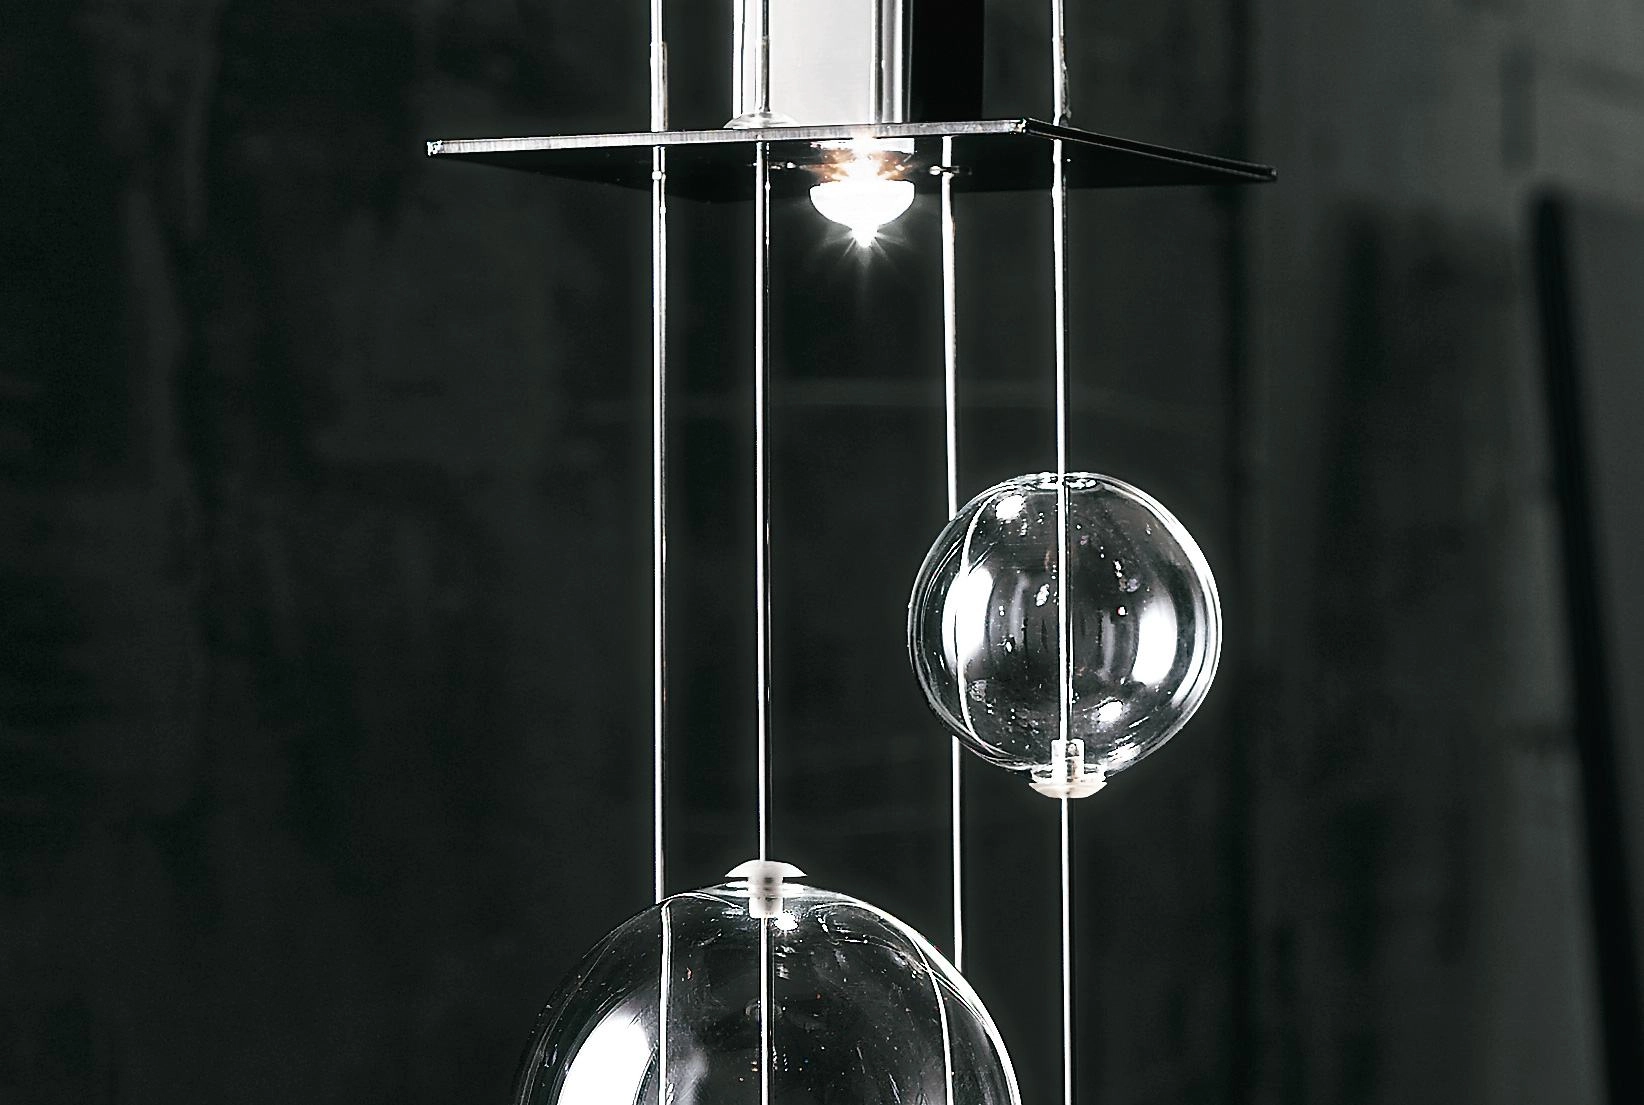 Niagara suspension lamp by Sil Lux